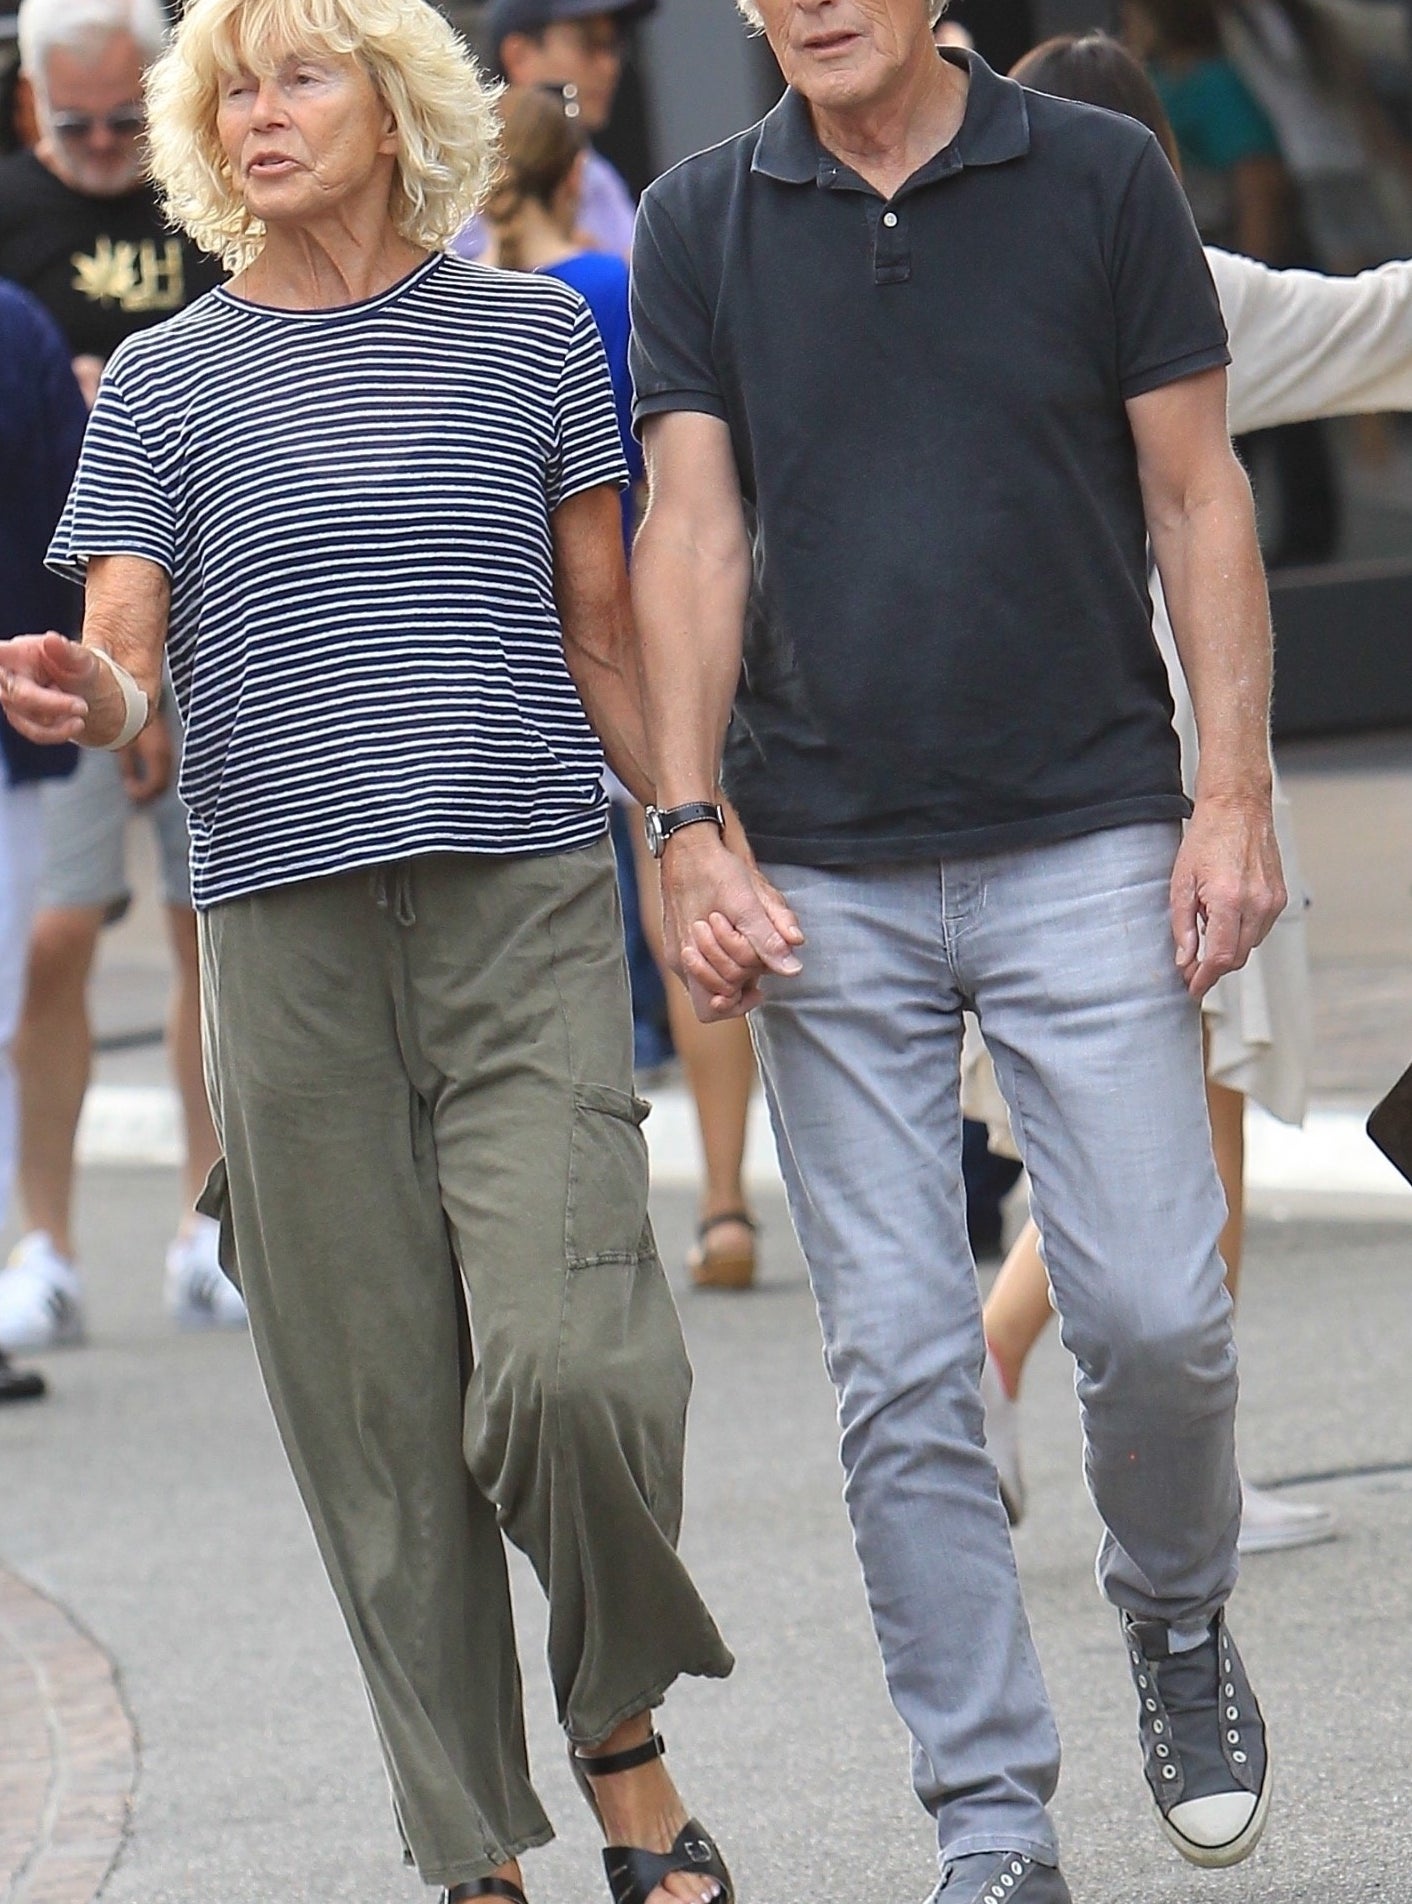 Suzanne and Keith holding hands and walking together, dressed casually